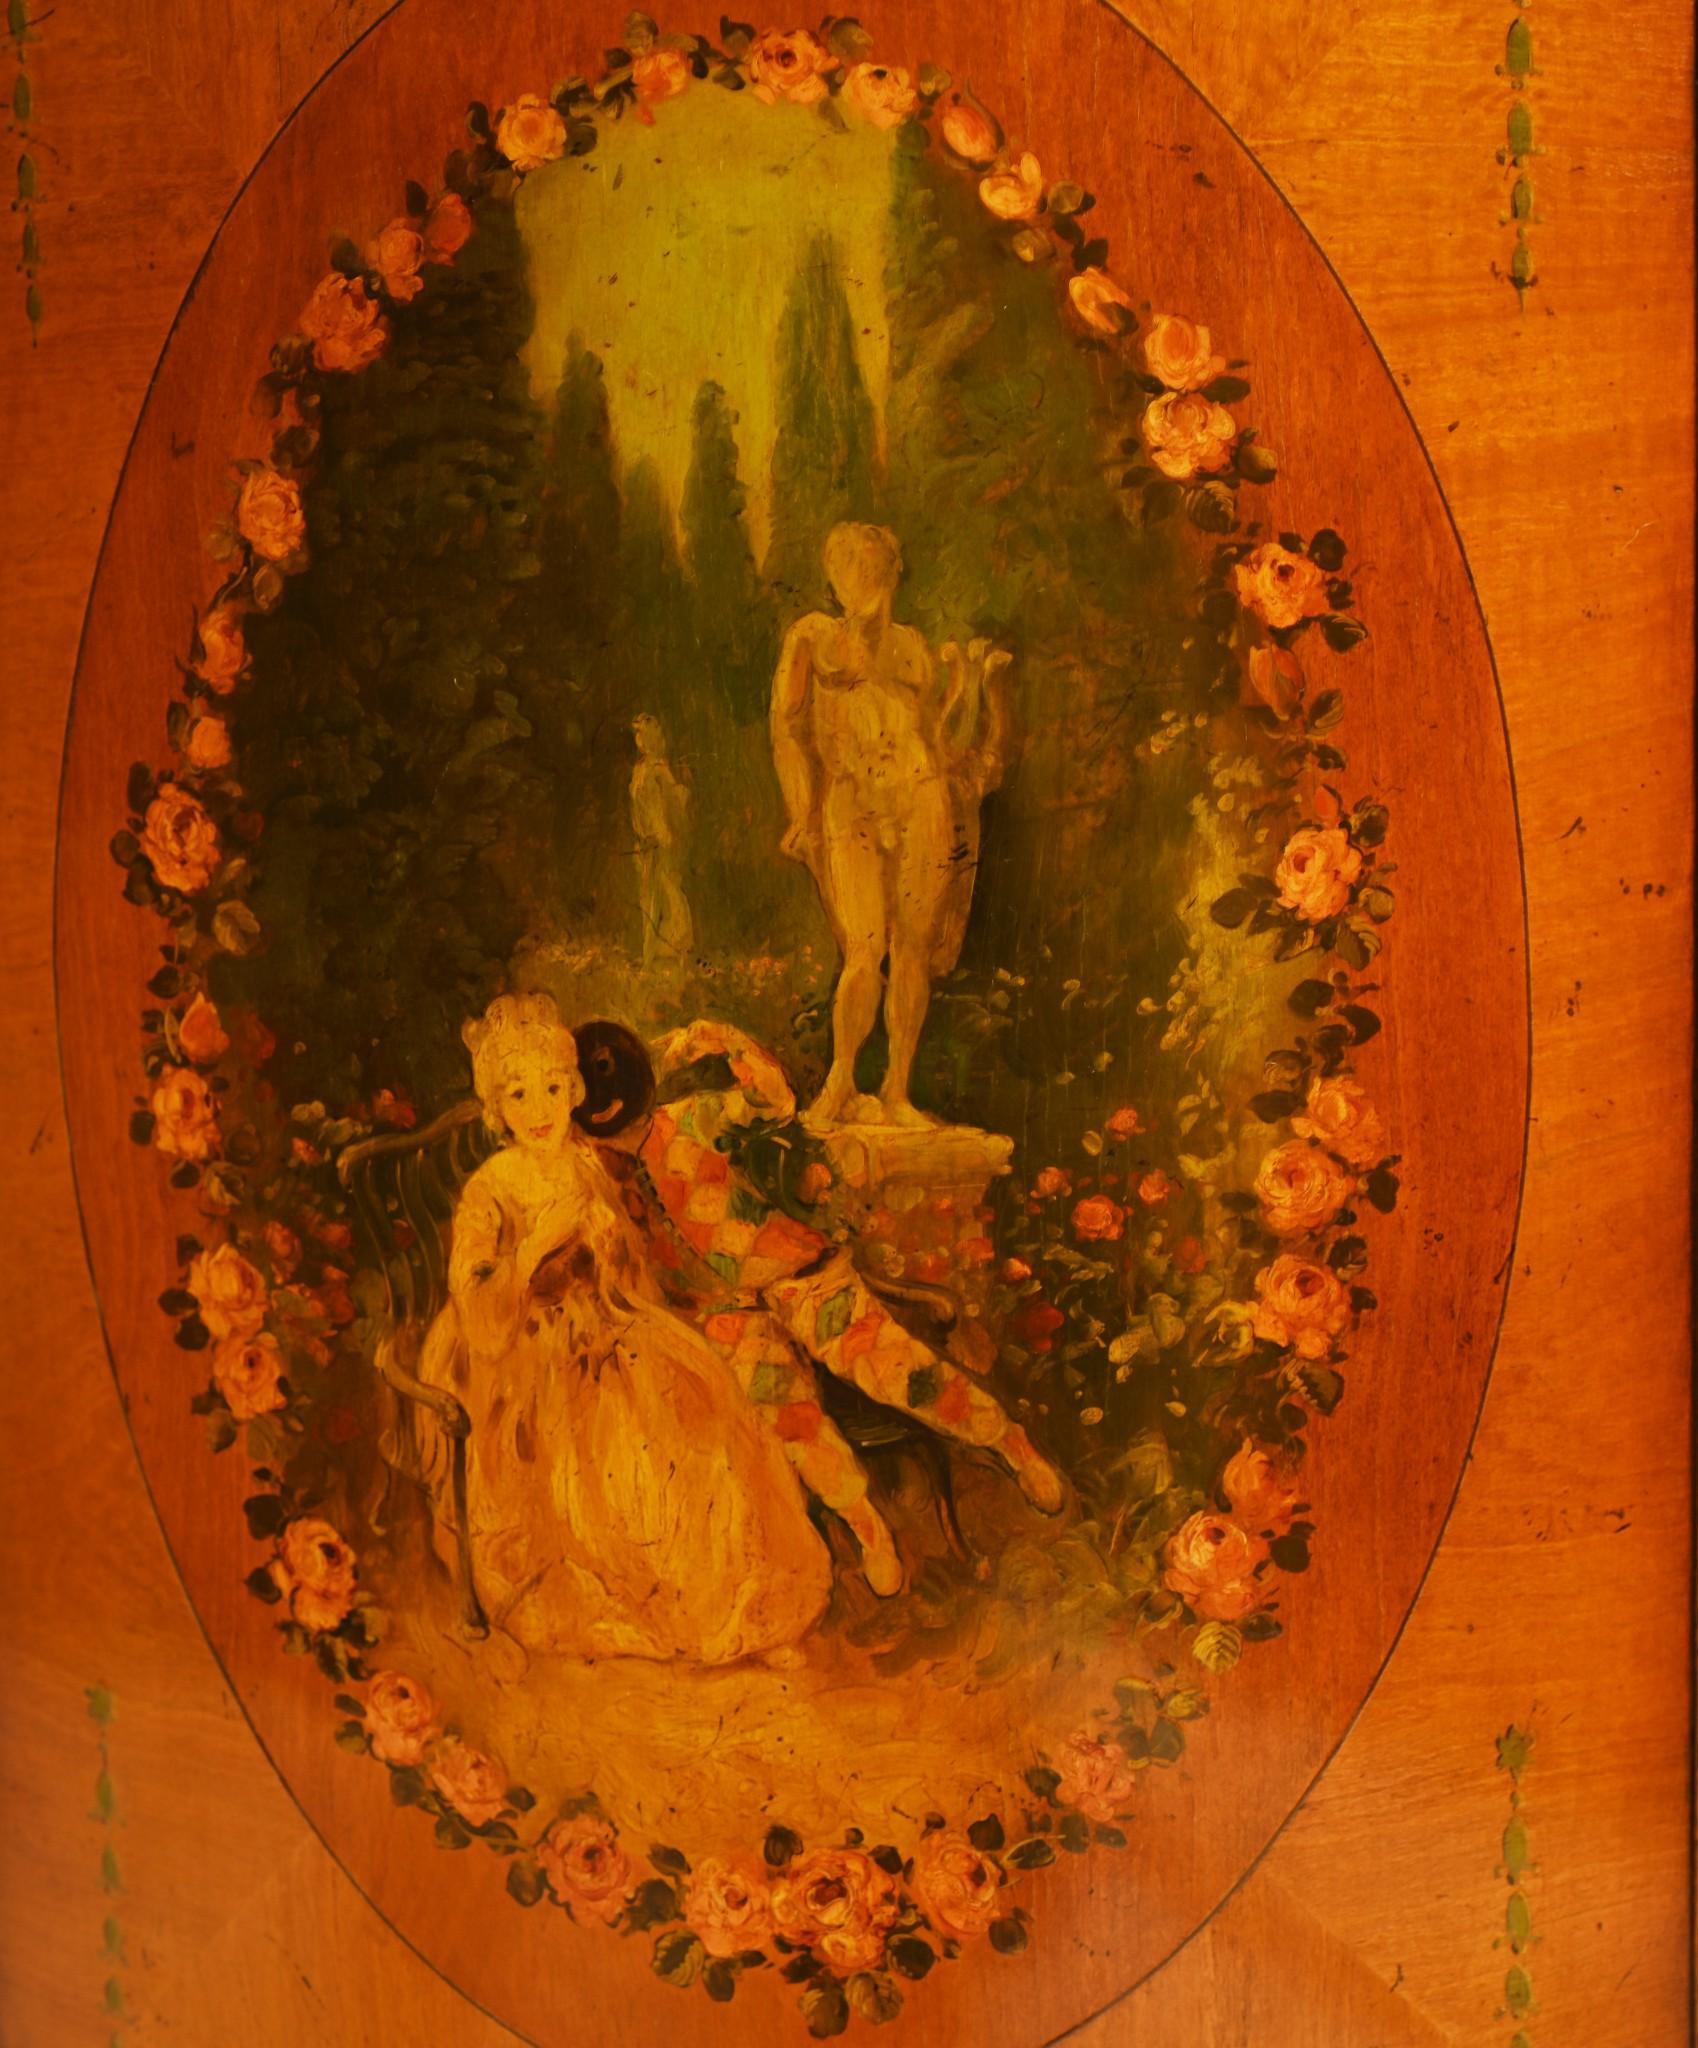 A Demilune satinwood commode painted the the Angelica Kaufman manner 
Circa 1930
Painted features include romantic scenes of young lovers
Bought from a dealer on Rue de Rossiers at the Paris antiques markets
We can ship to anywhere in the world